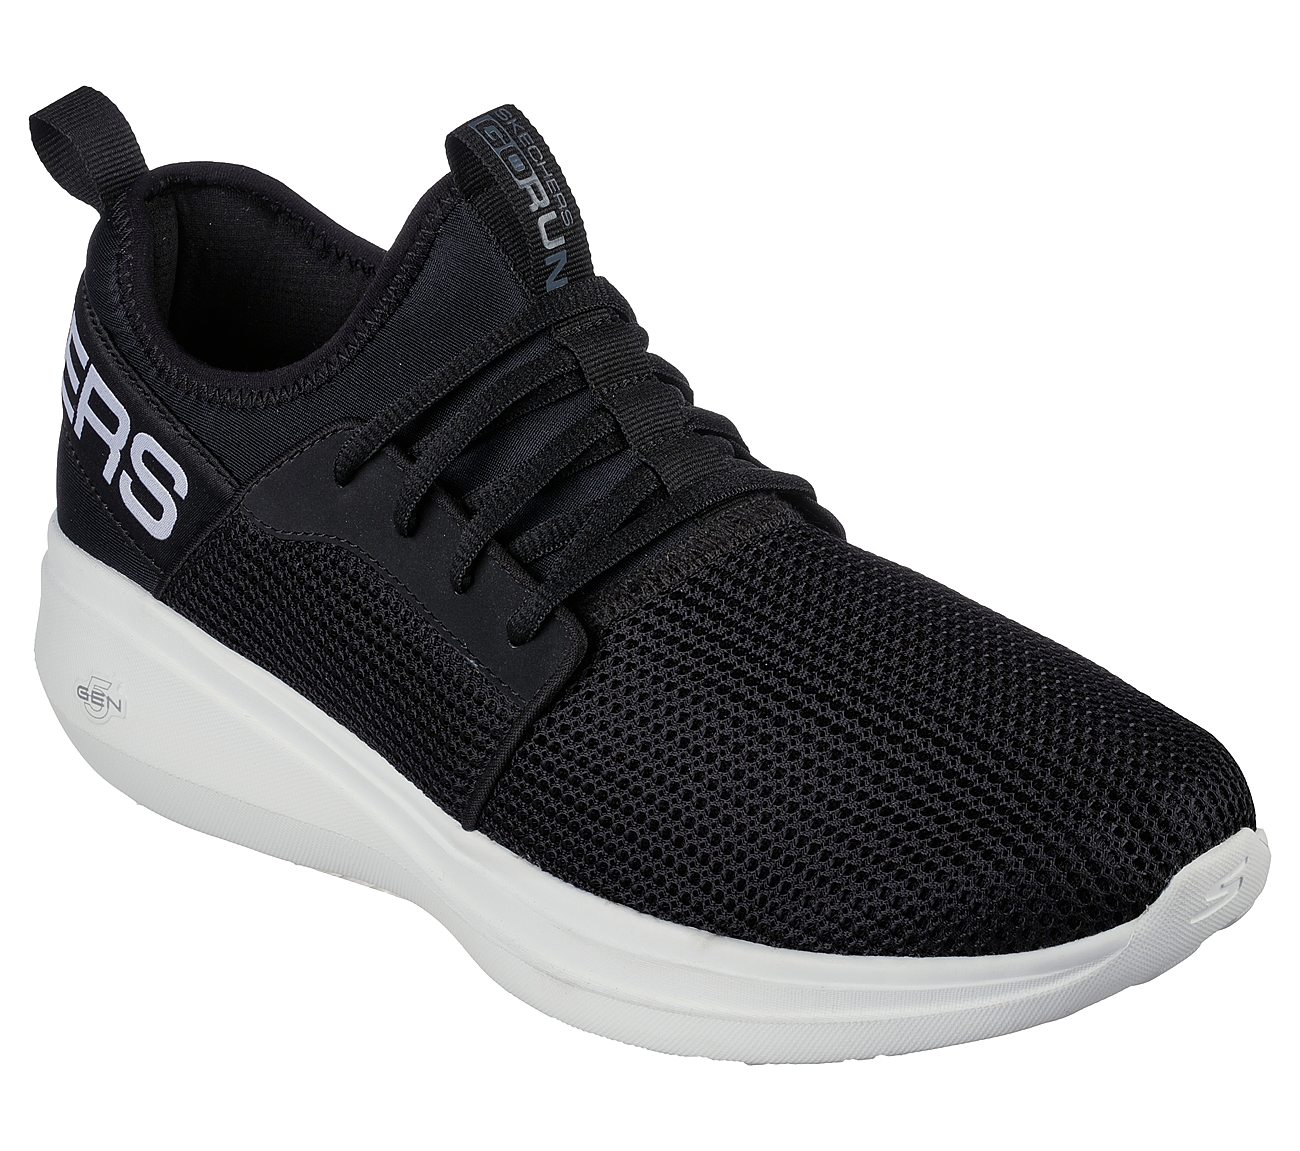 GO RUN FAST-VALOR, BLACK/WHITE Footwear Right View